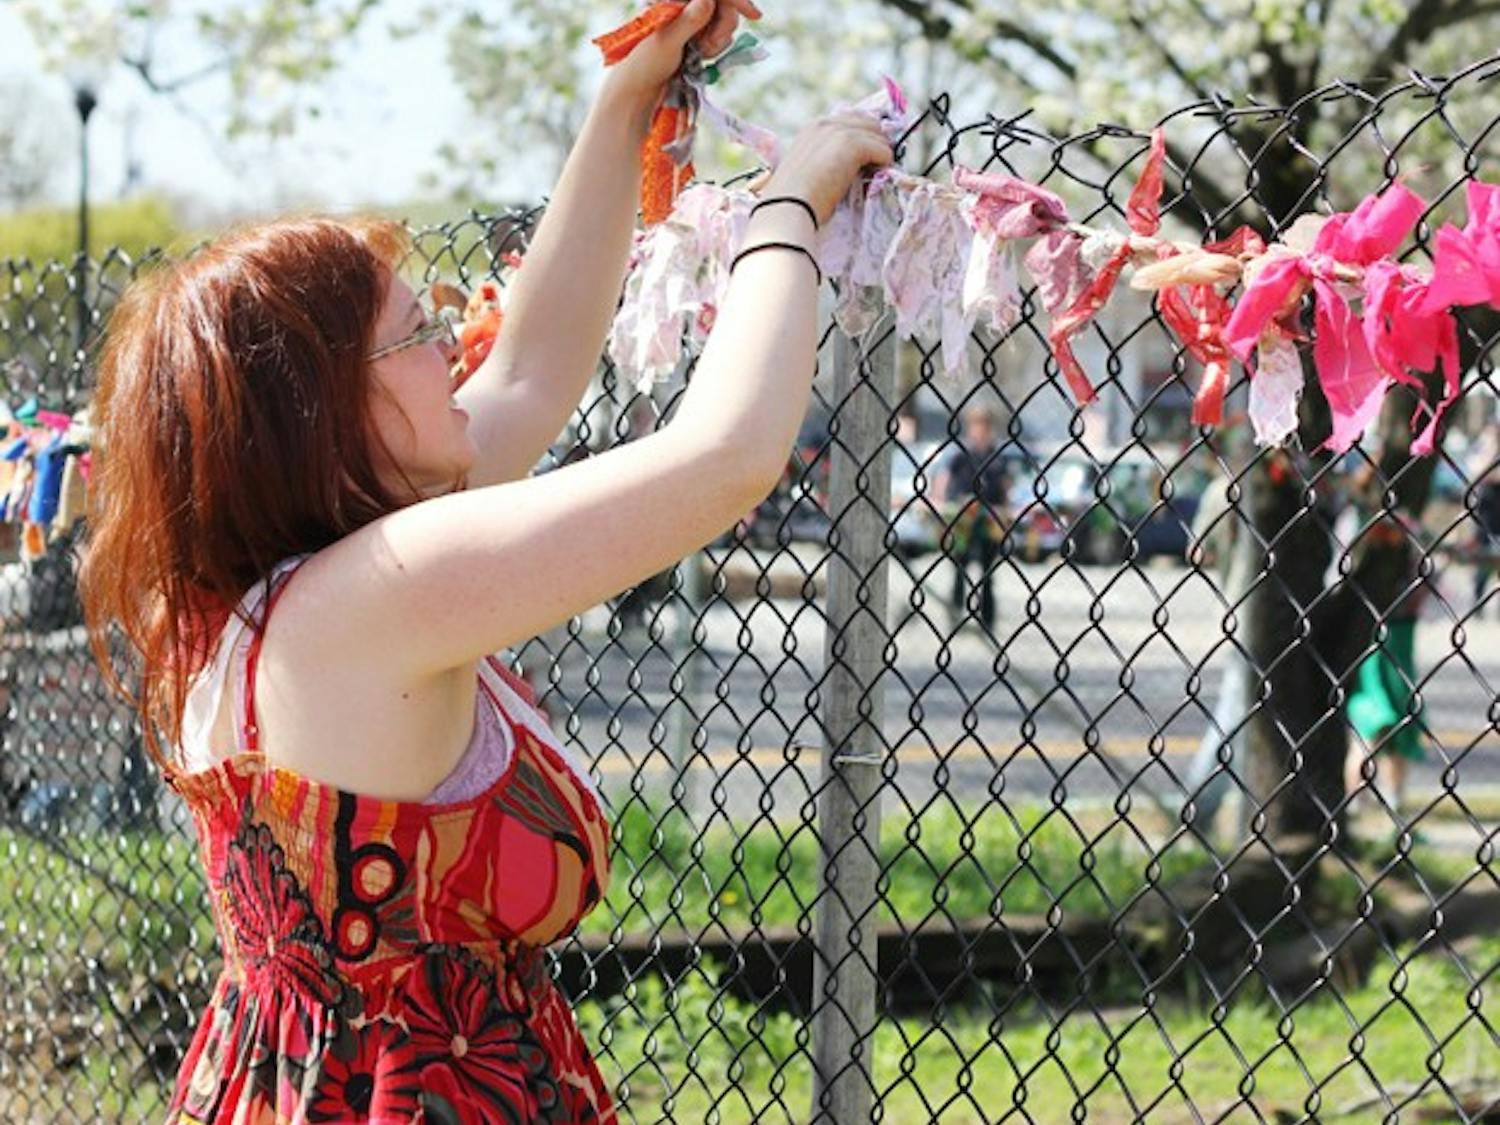 Candace Burch decorates the fence surrounding the lot 201 N. Greensboro St. with a garland made of up-cycle materials at the Guerrilla Gardening event in Carrboro Saturday morning at the Carrboro Commune. The group gardened and decorated around the lot to protest the proposed CVS store.